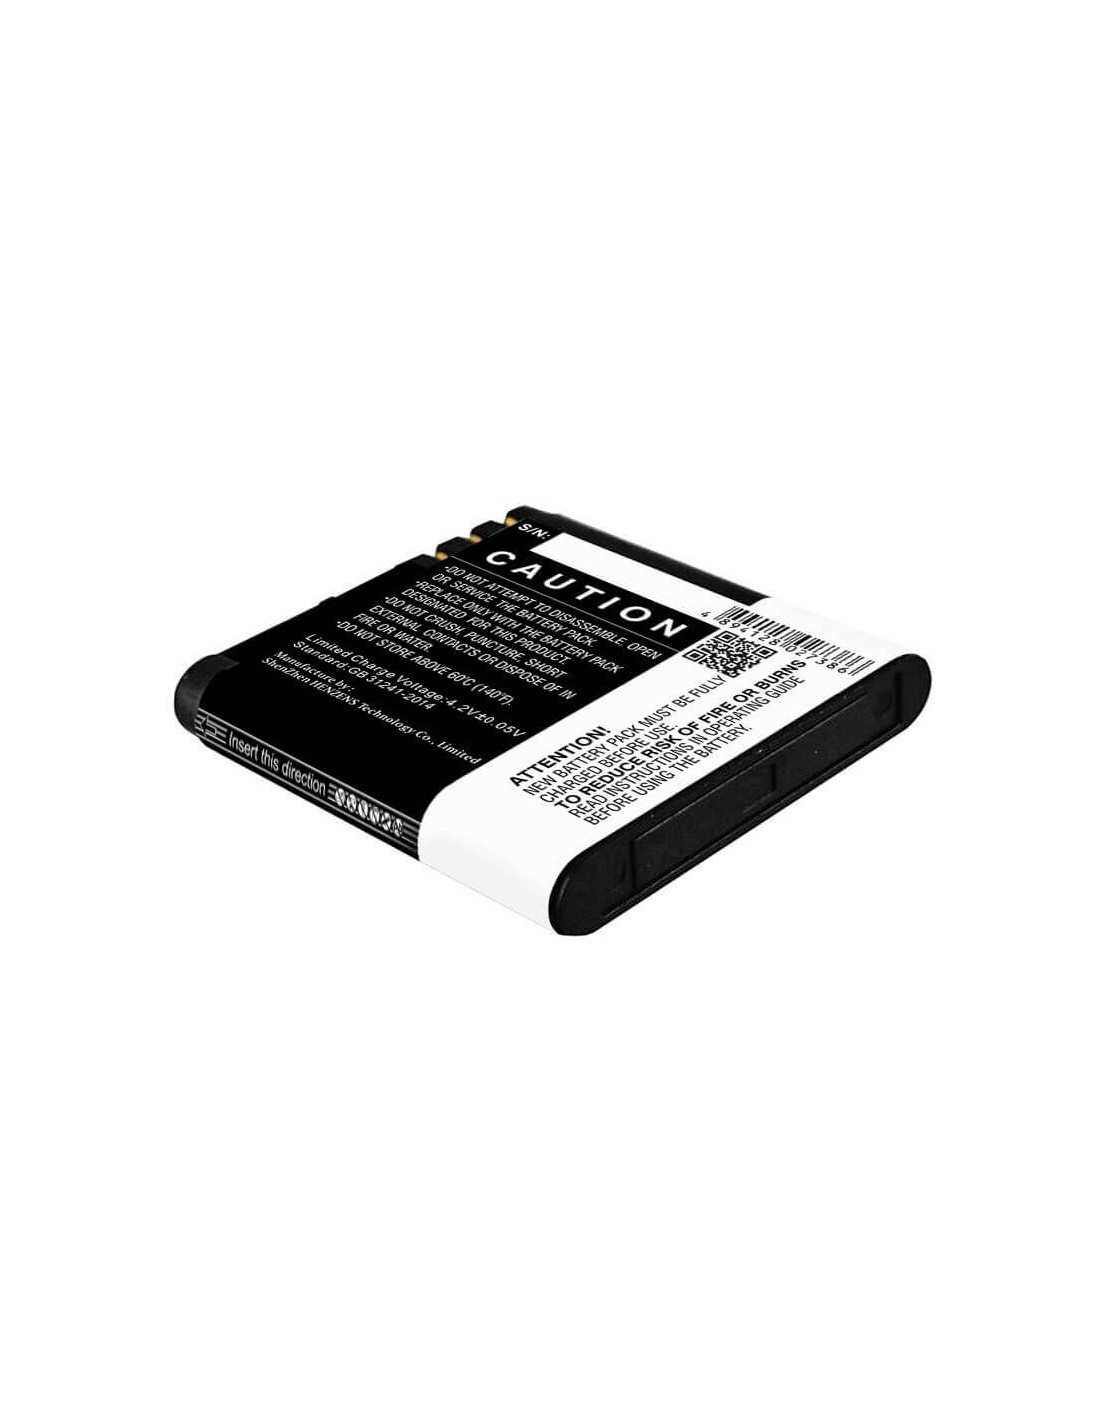 Battery for Nokia 6700 Classic, 6700 classic Illuvial 3.7V, 950mAh - 3.52Wh